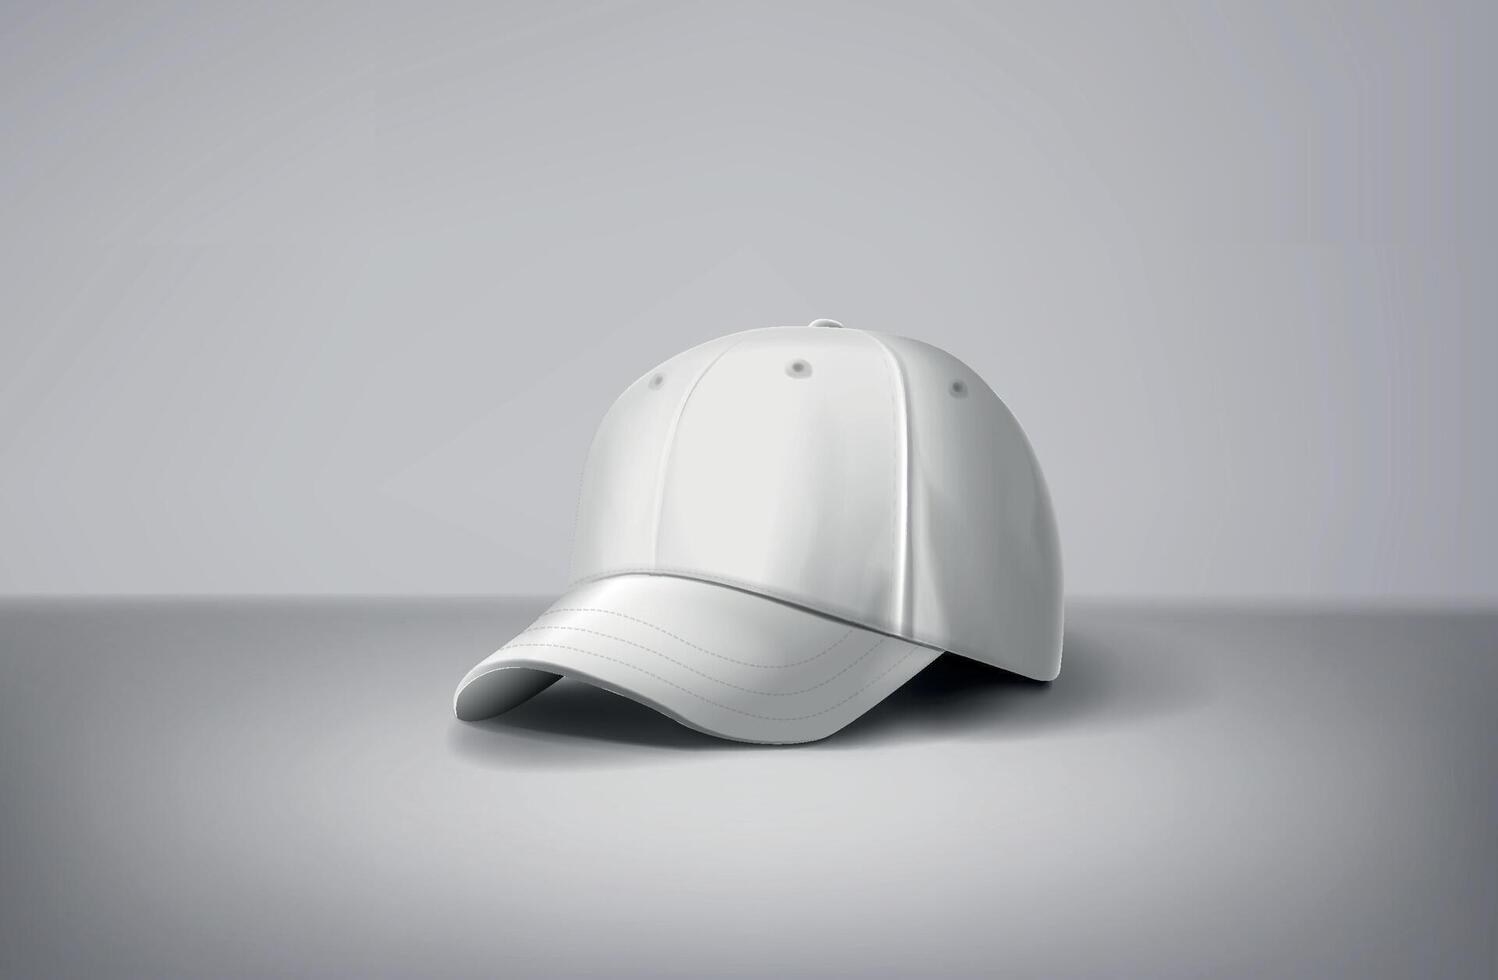 Black and white baseball caps mock up in gray background, front and back or different sides. For branding and advertising. vector